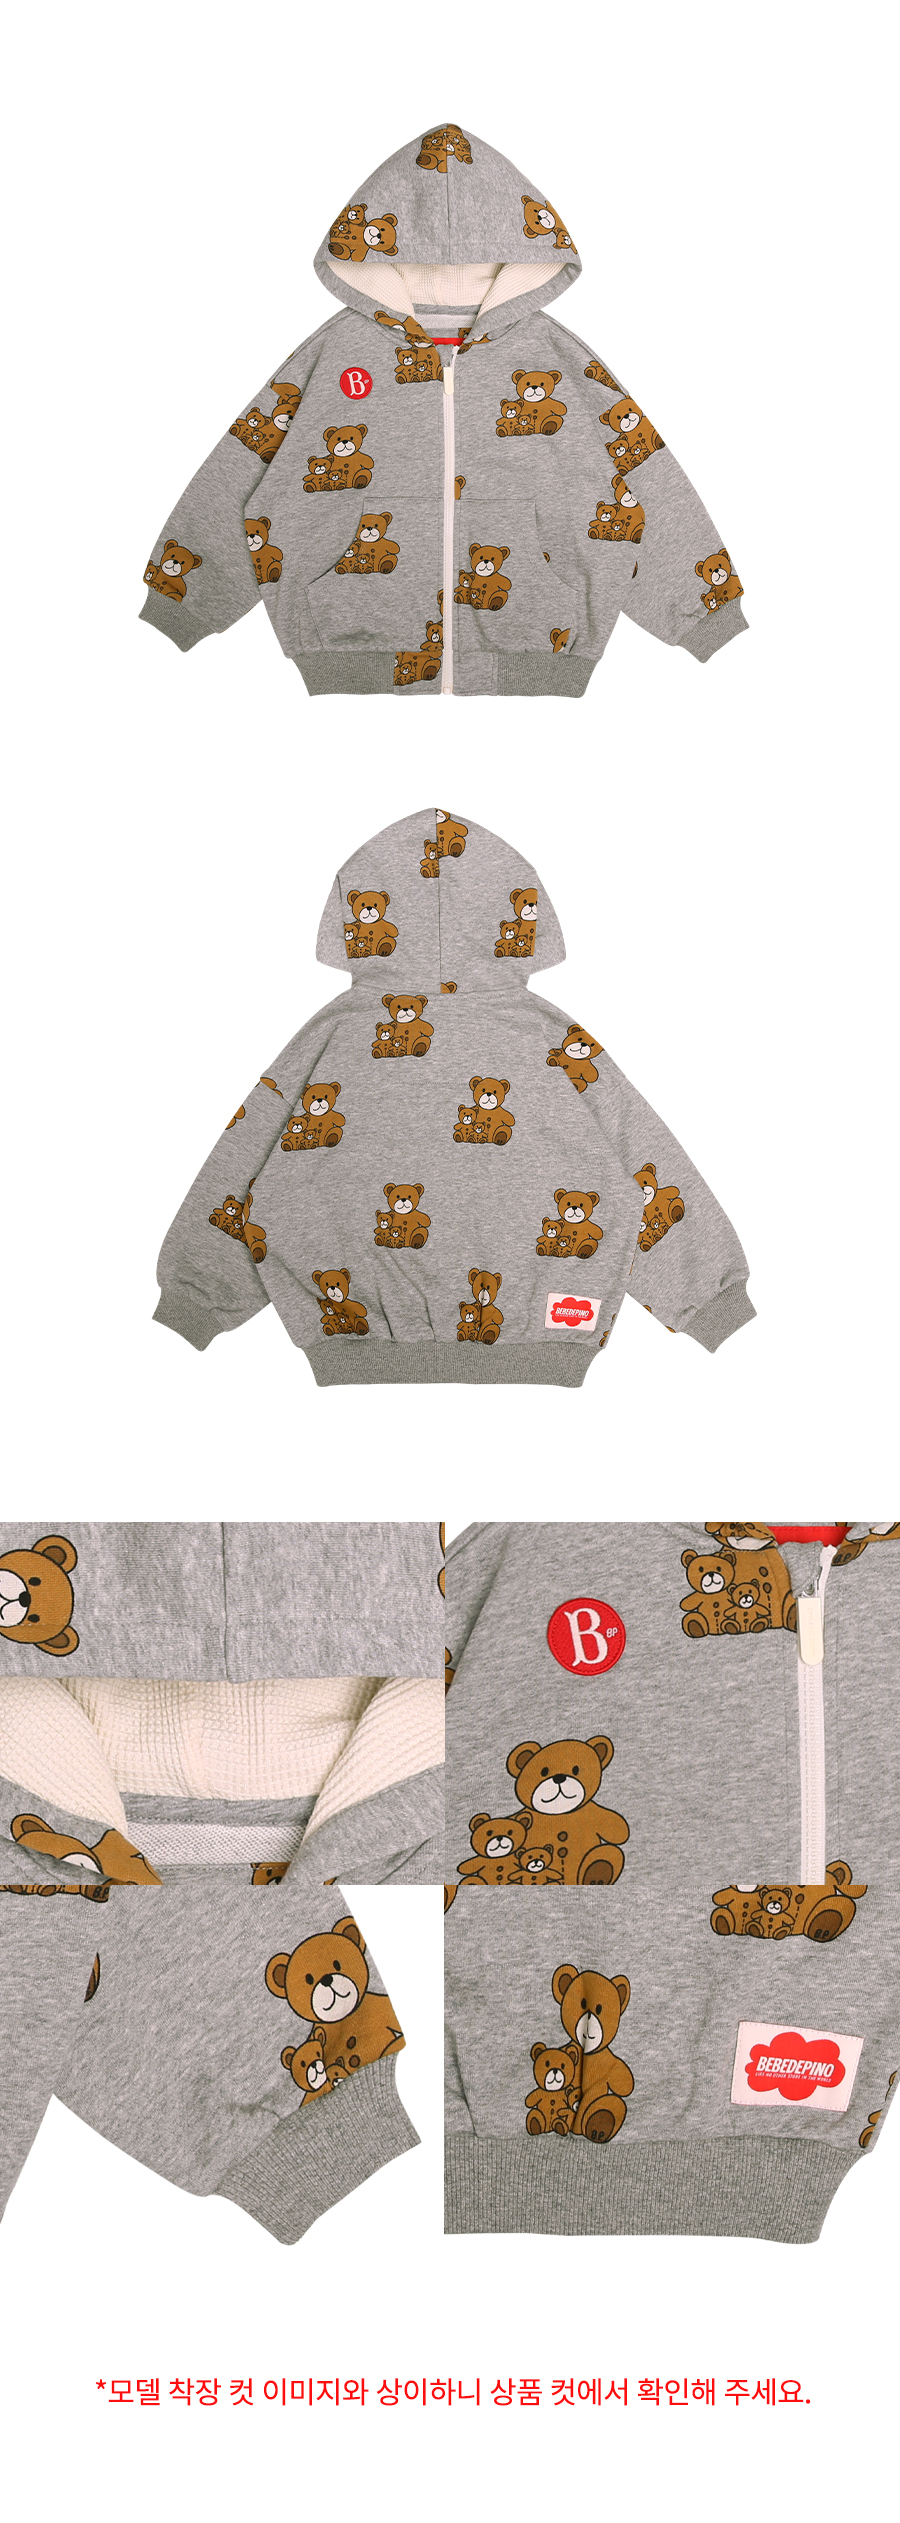 All over famille bear loose fit zip up hoodie jumper 상세 이미지